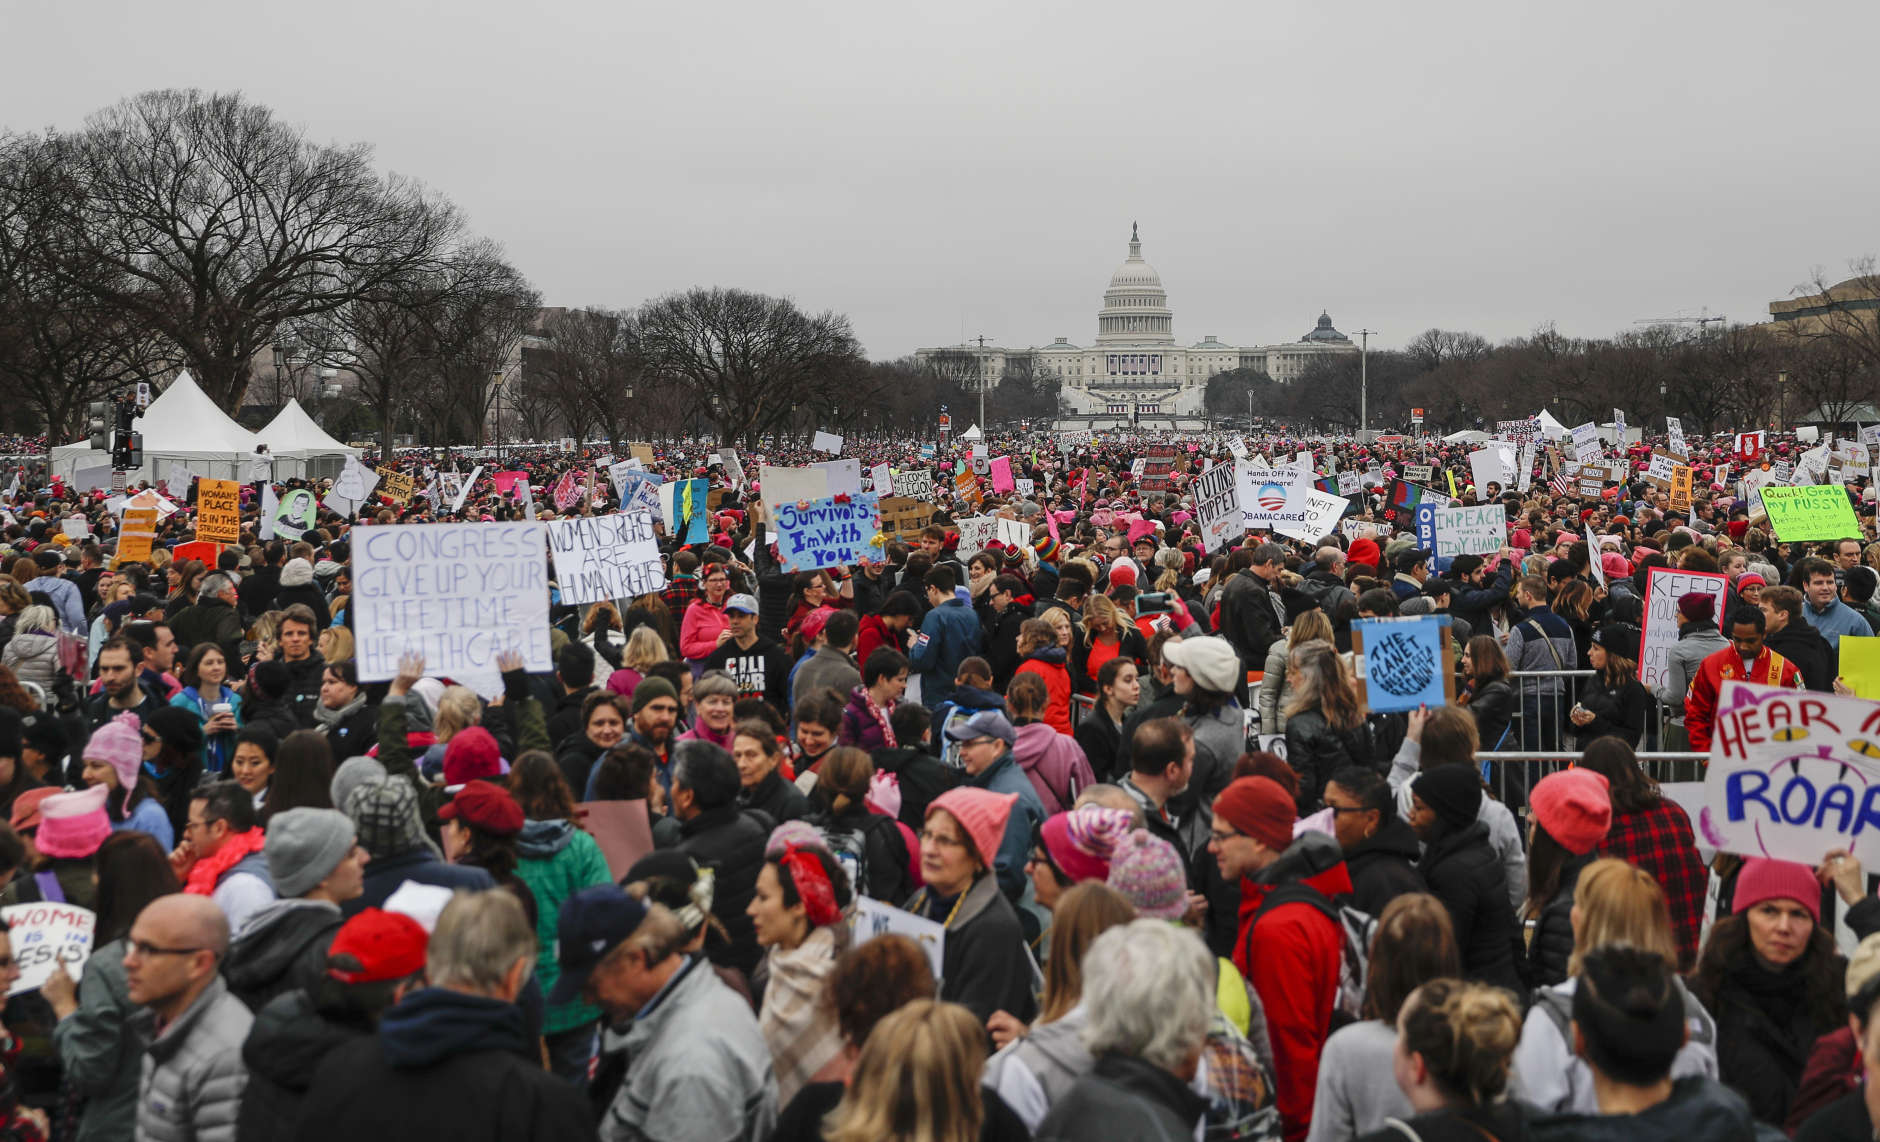 Protesters gather on the National Mall for the Women's March on Washington during the first full day of Donald Trump's presidency, Saturday, Jan. 21, 2017 in Washington.  (AP Photo/John Minchillo)